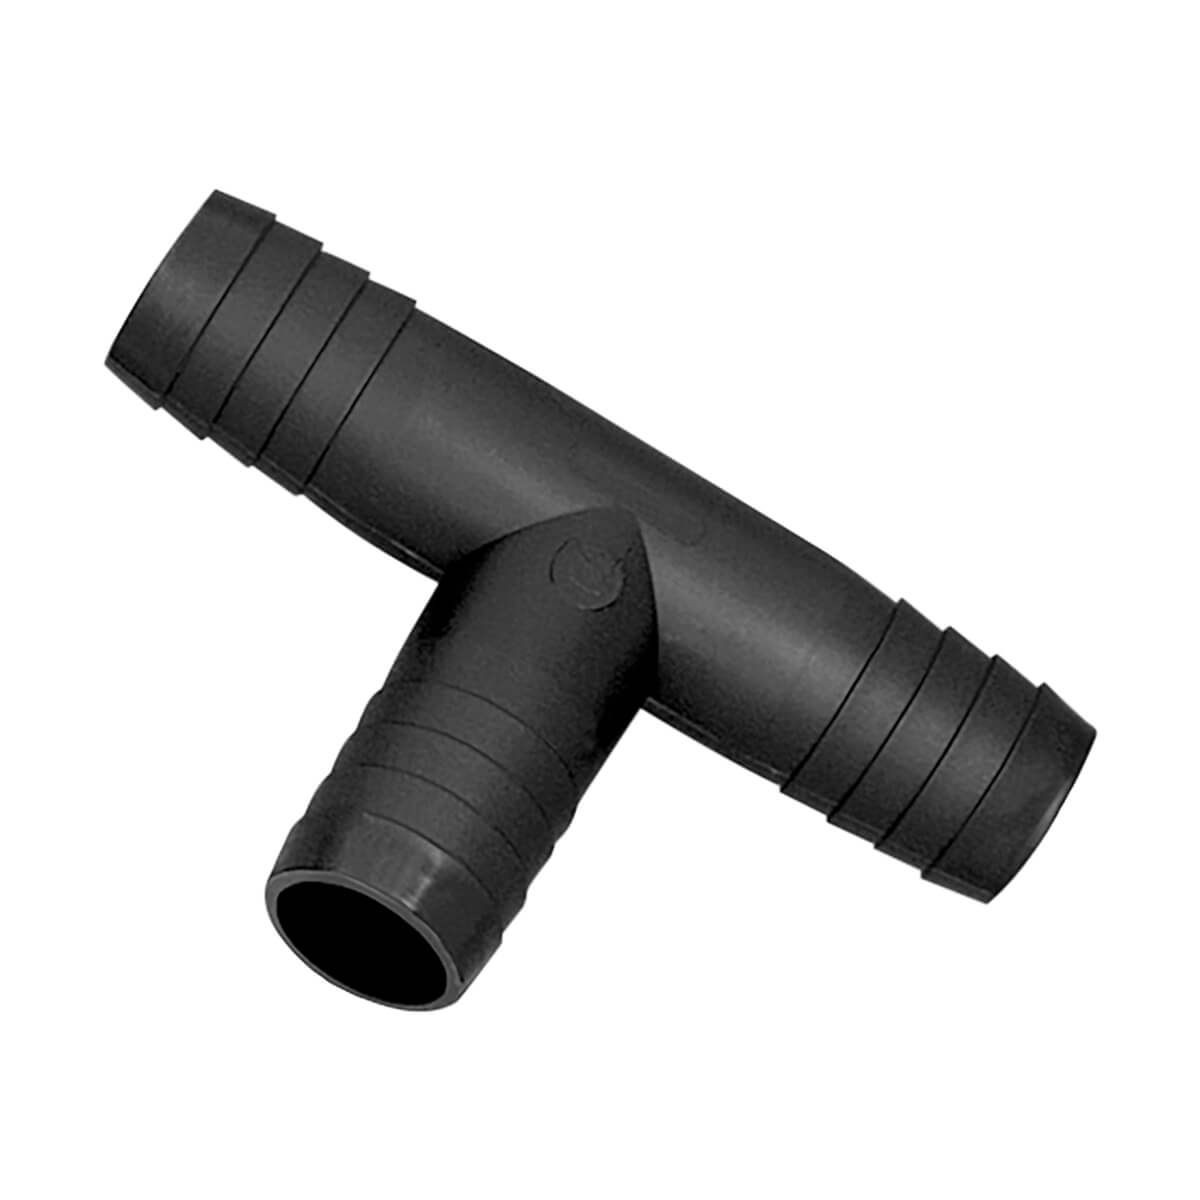 Insert Tee 3/8-in Hose Barb